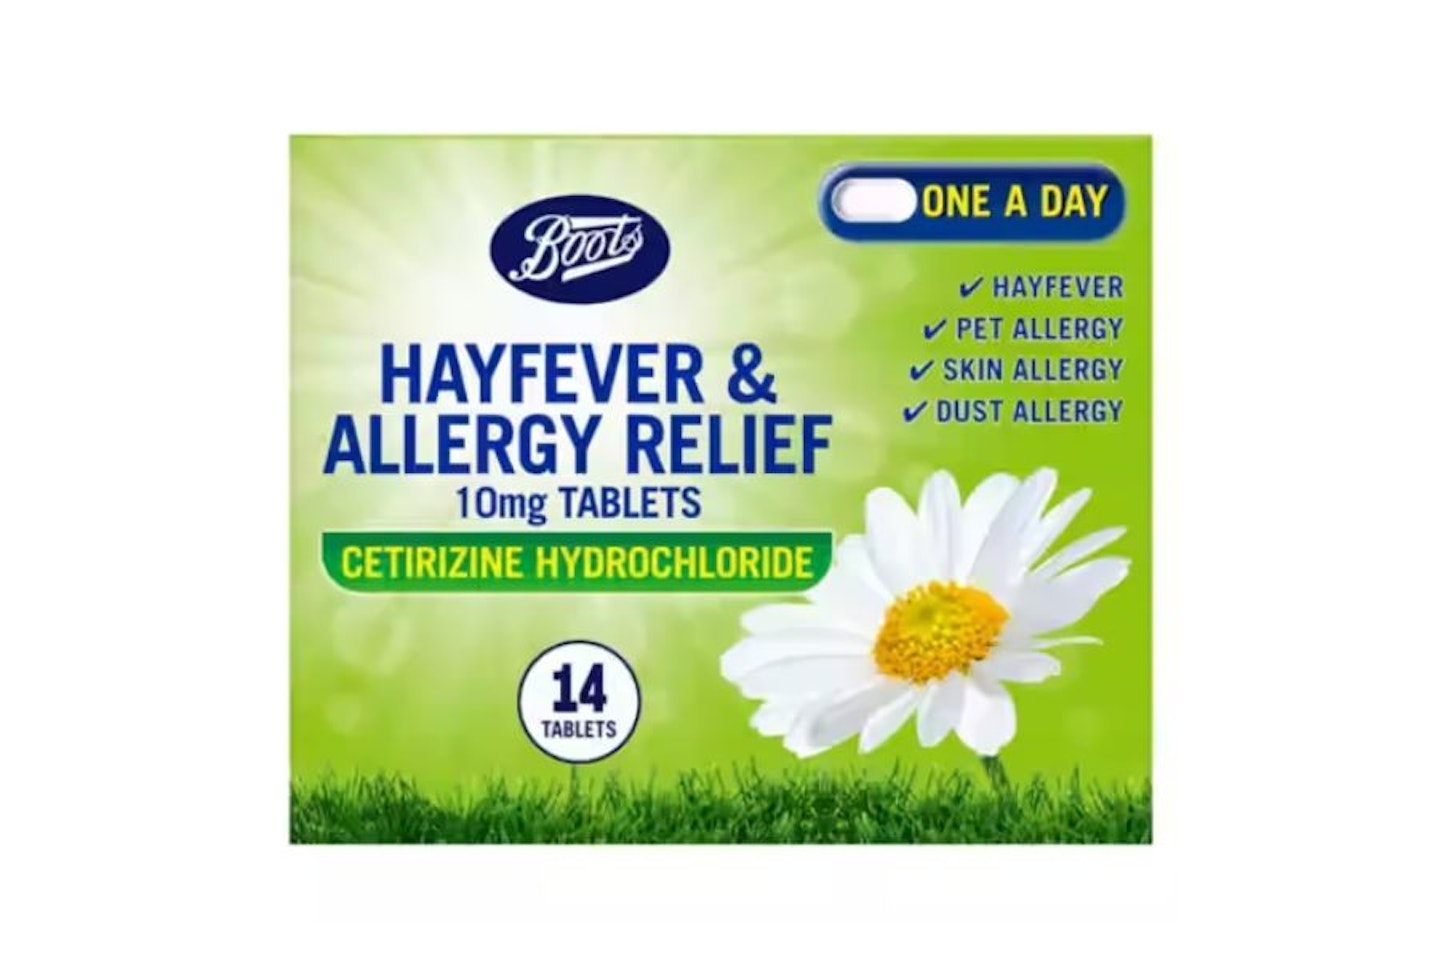 Boots hayfever tablets